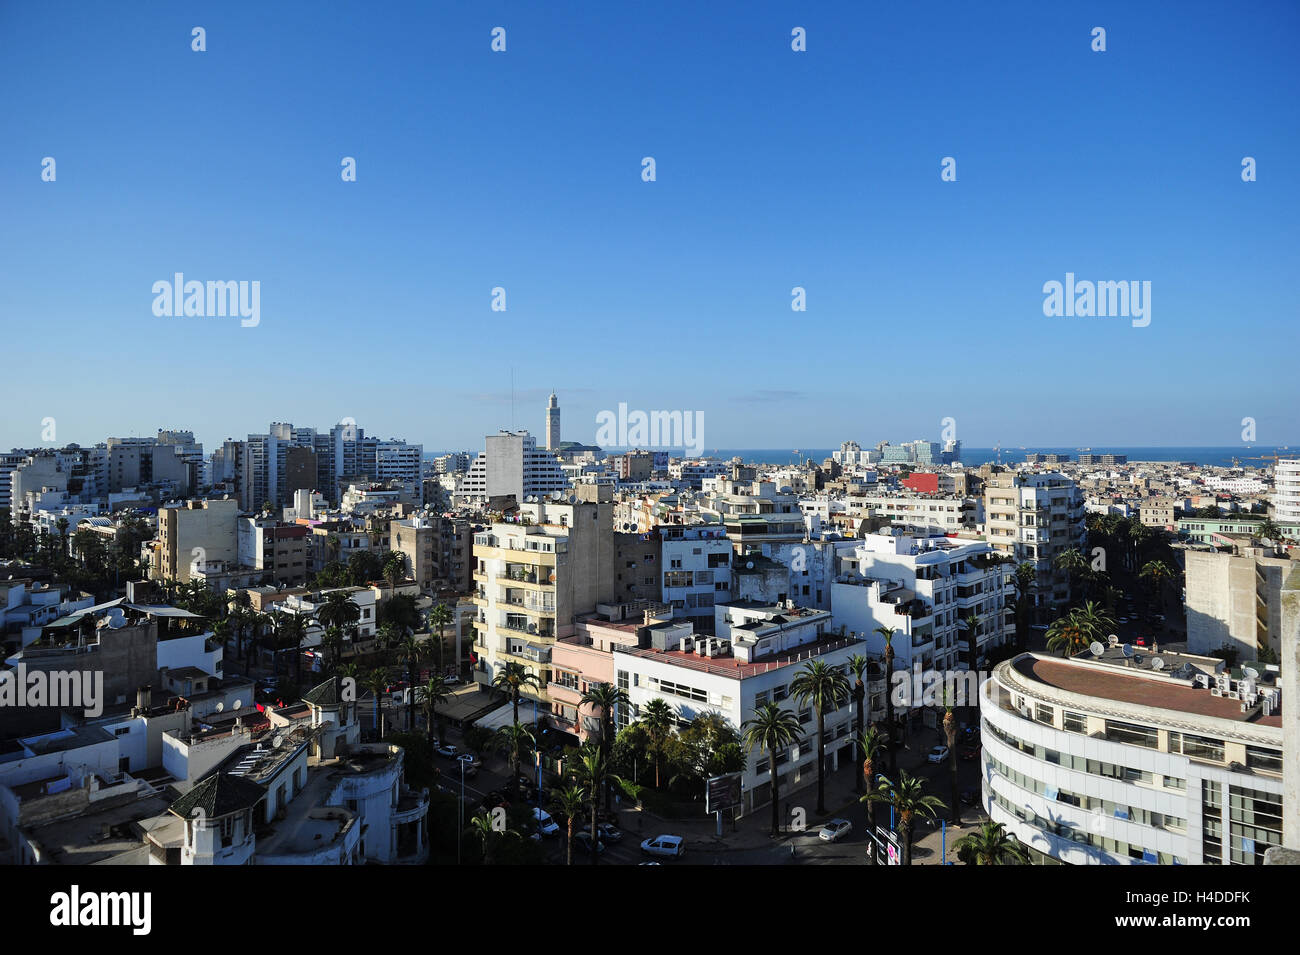 View of Casablanca from the top of the Cathedrale, a former cathedral in the city centre Stock Photo